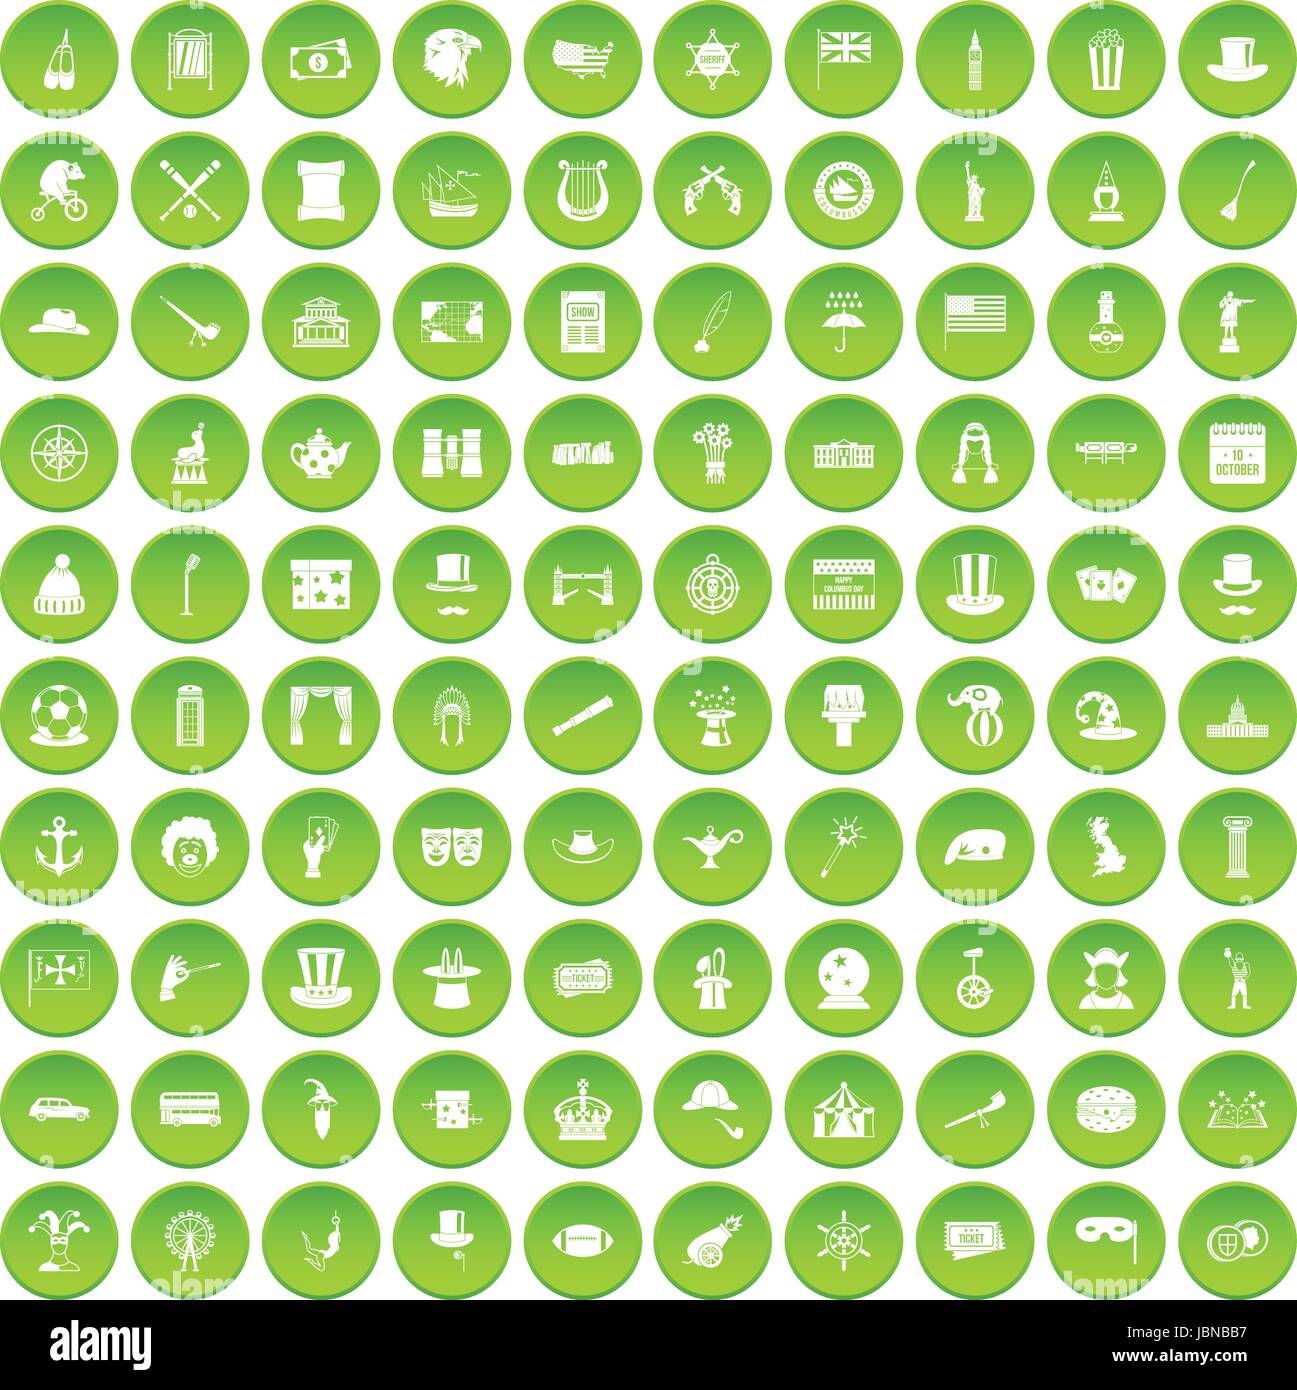 100 top hat icons set green circle isolated on white background vector illustration Stock Vector